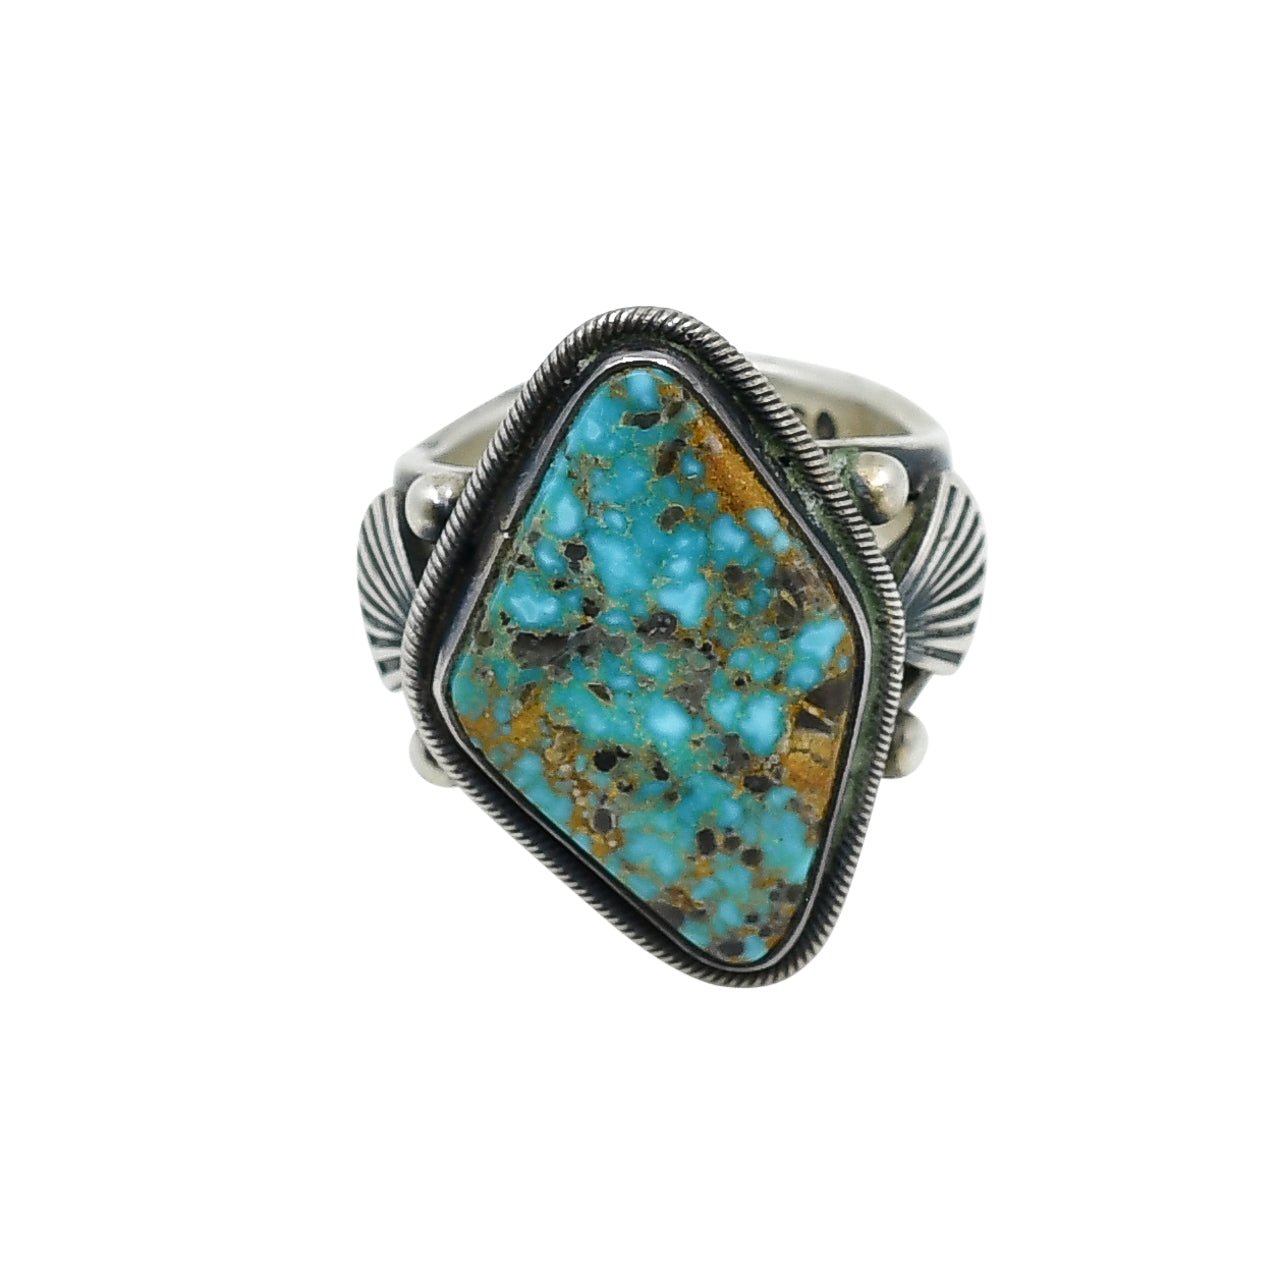 Steve Arviso Ring of Natural Turquoise – Turquoise & Tufa